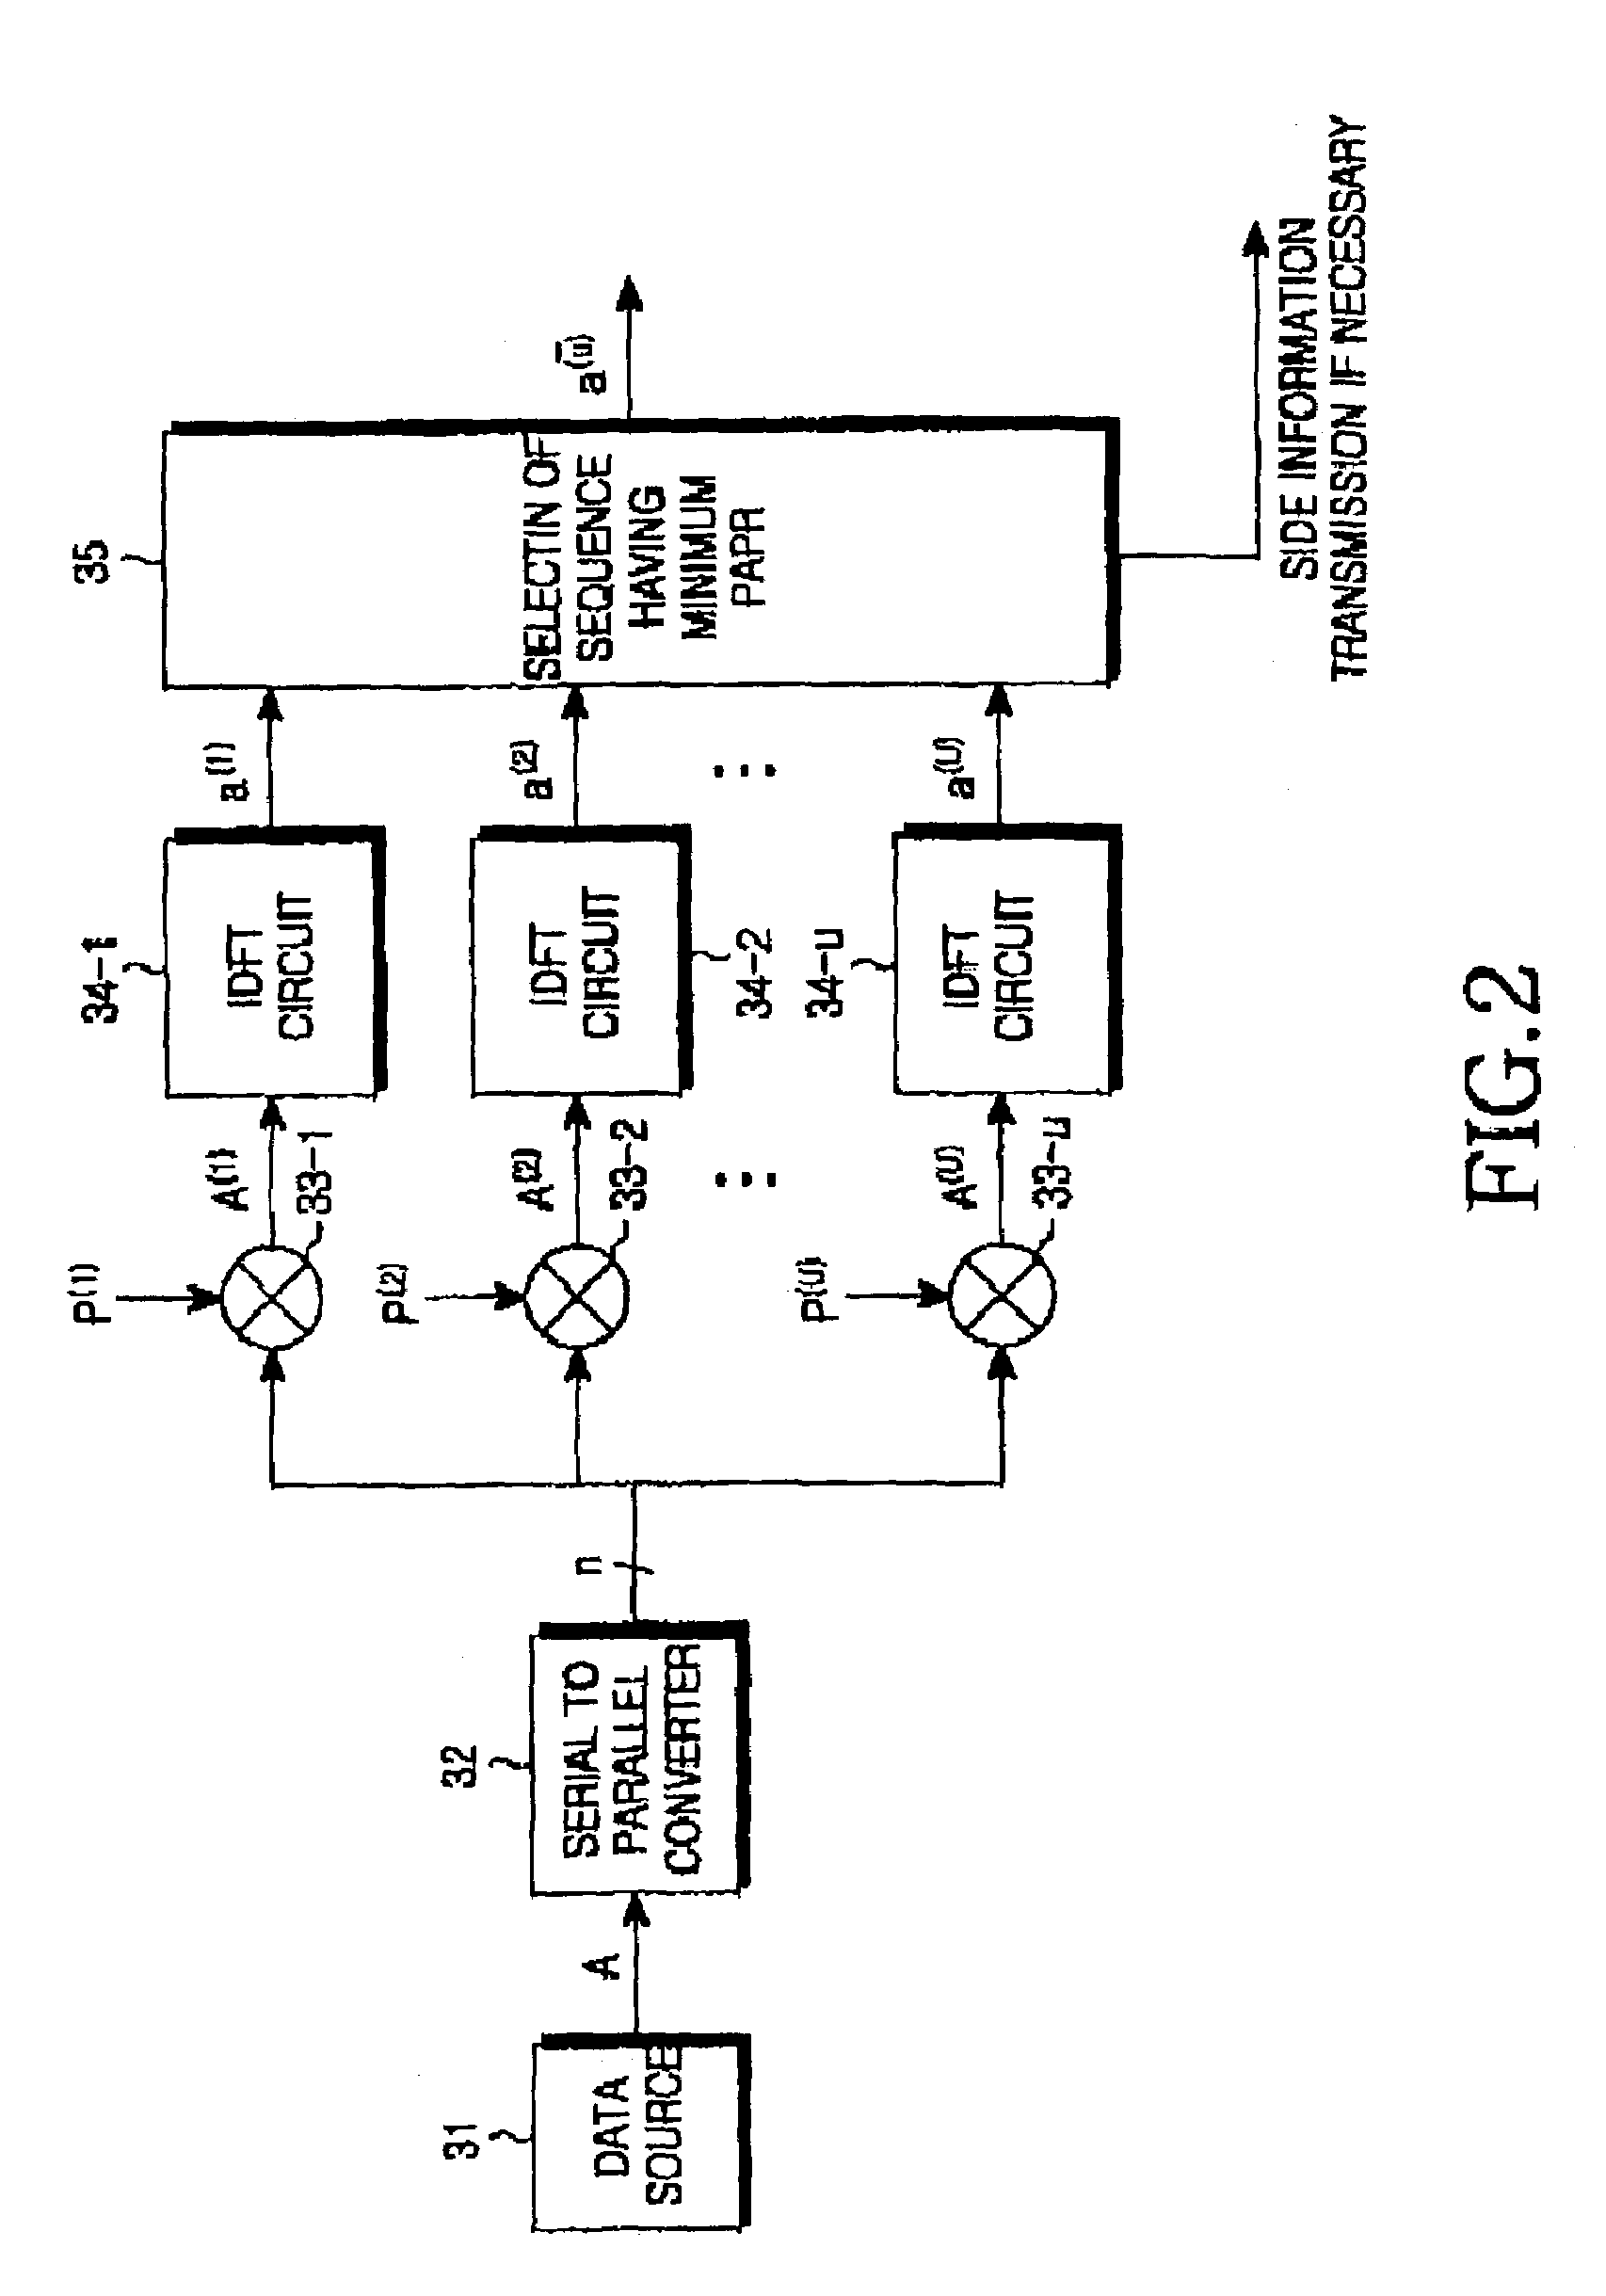 Method and apparatus for performing digital communications